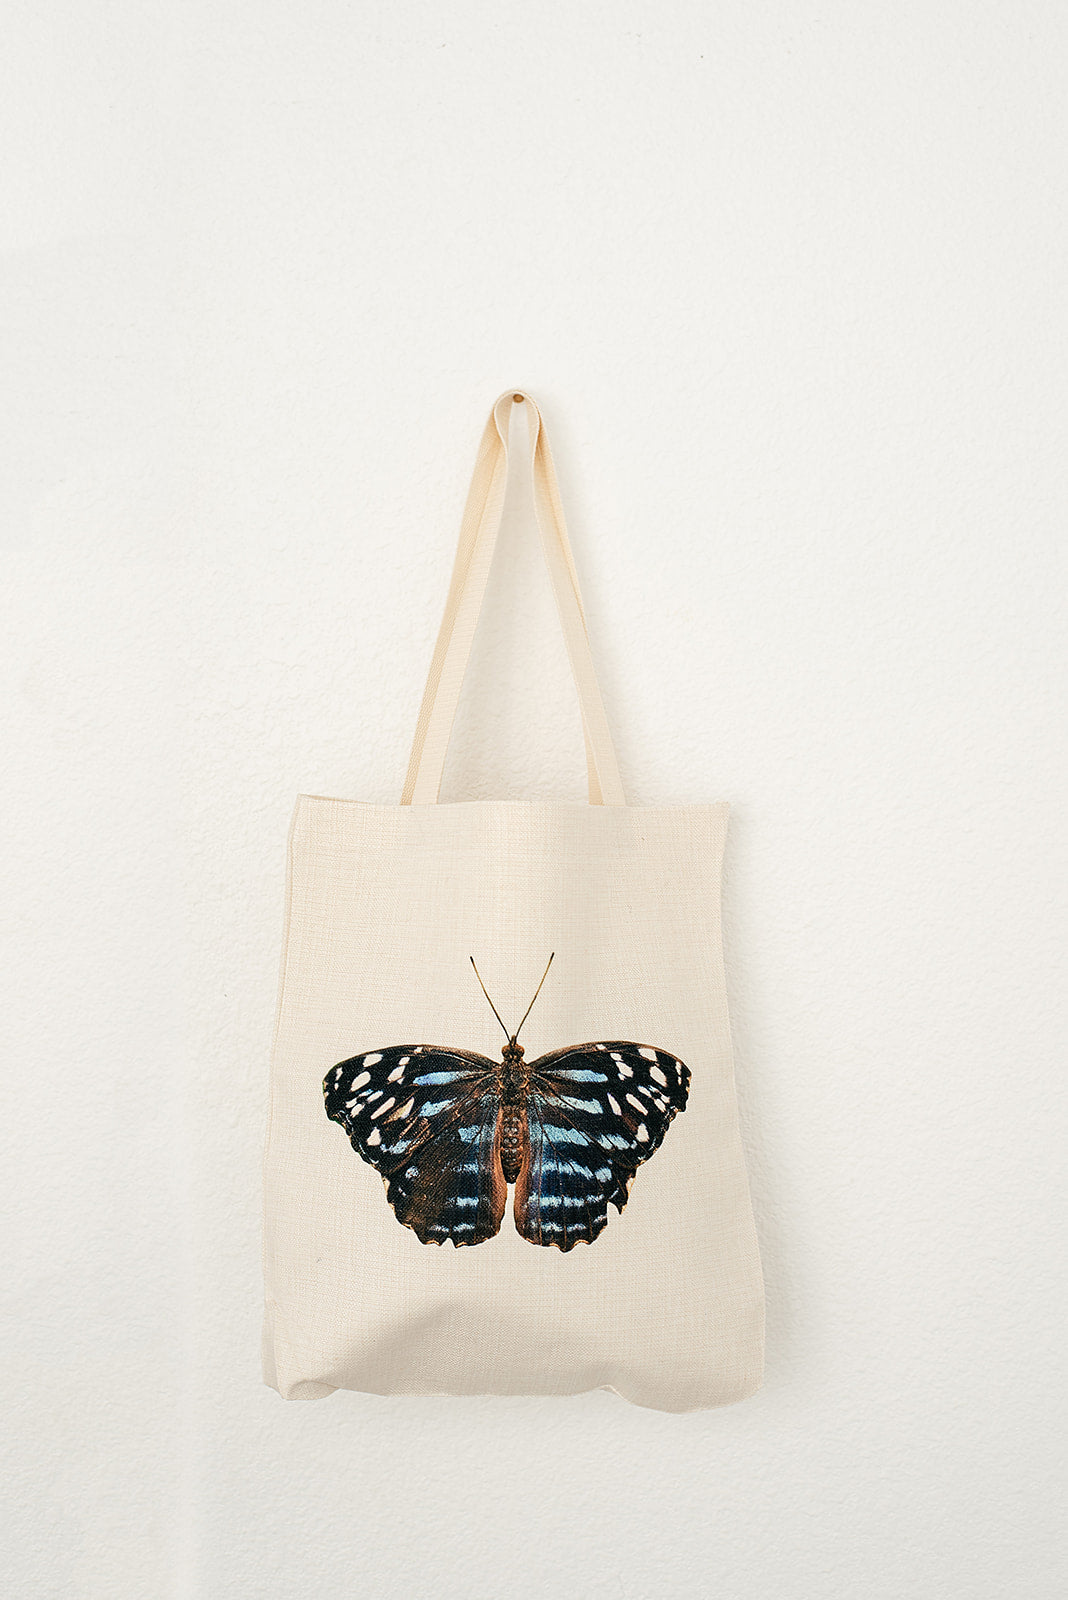 Blue Butterfly Tote, College Student Gift